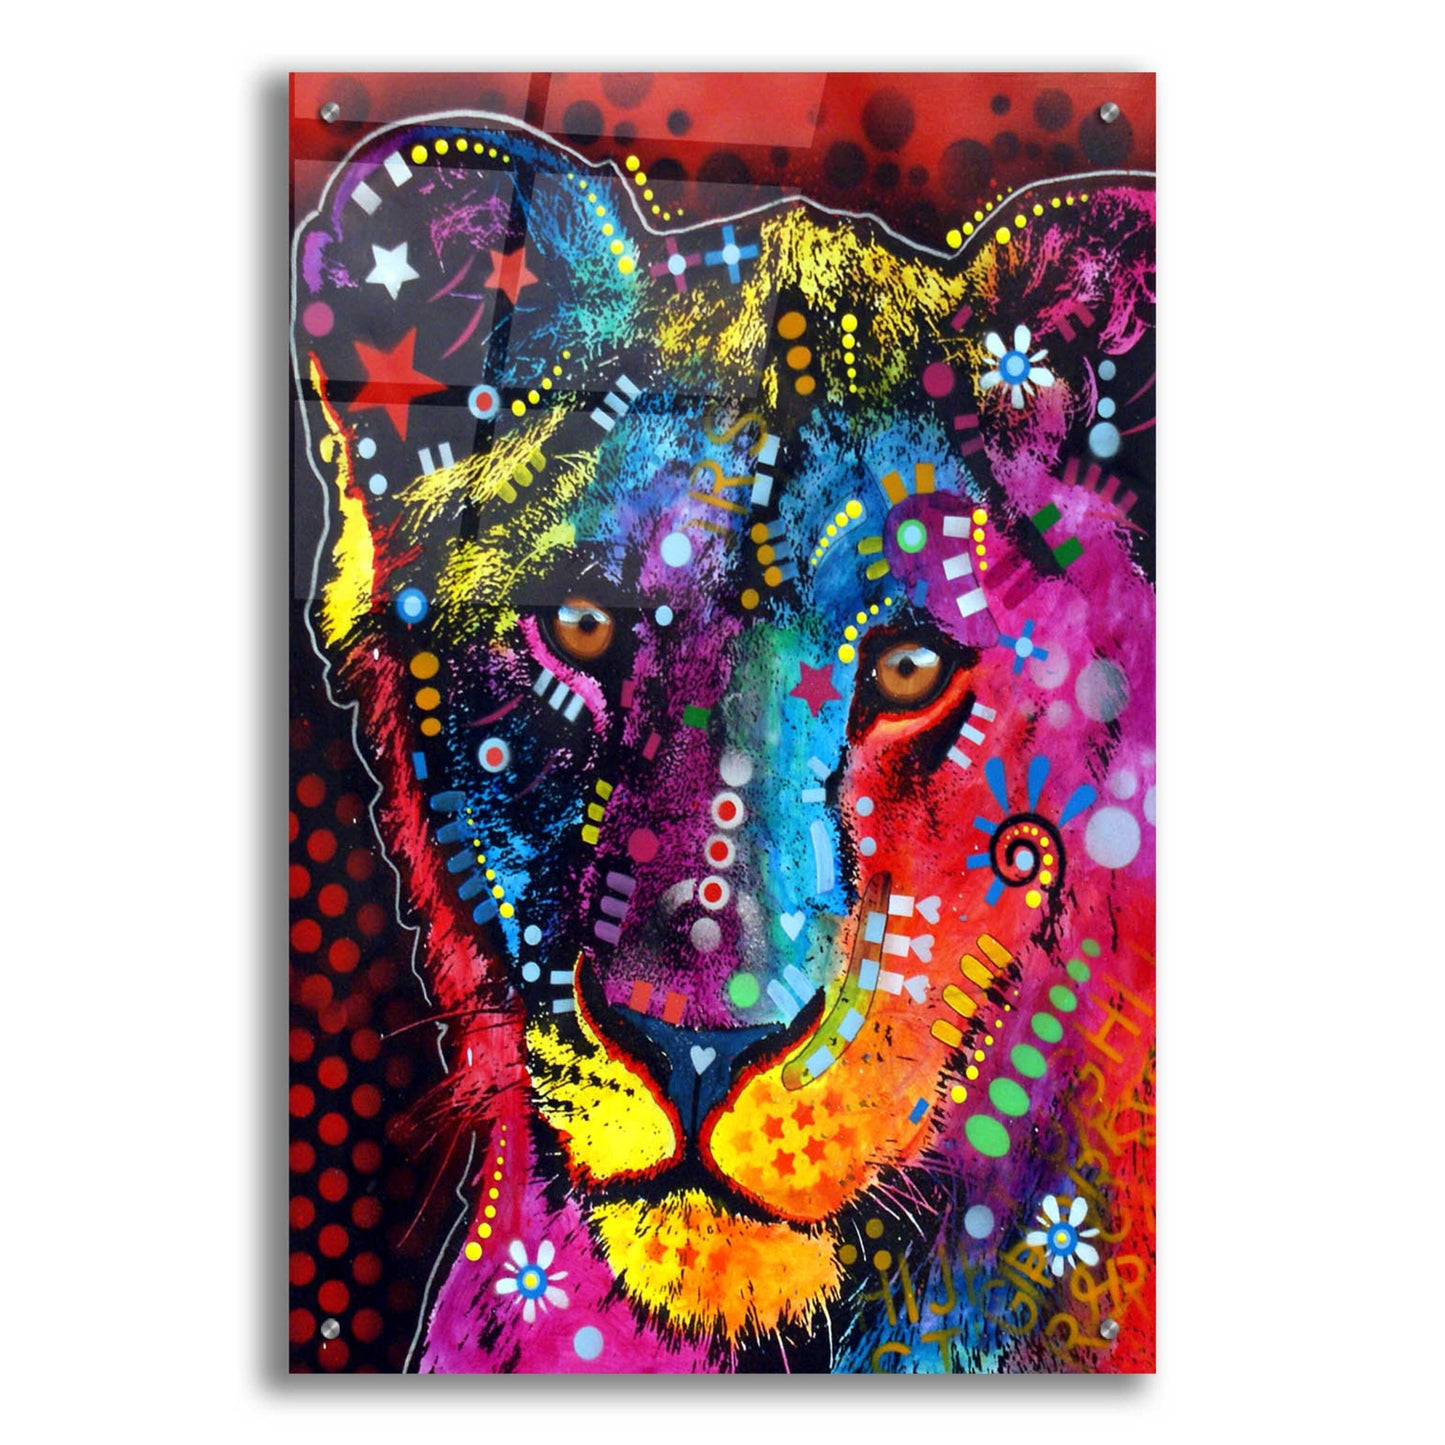 Epic Art 'Young Lion' by Dean Russo, Acrylic Glass Wall Art,24x36